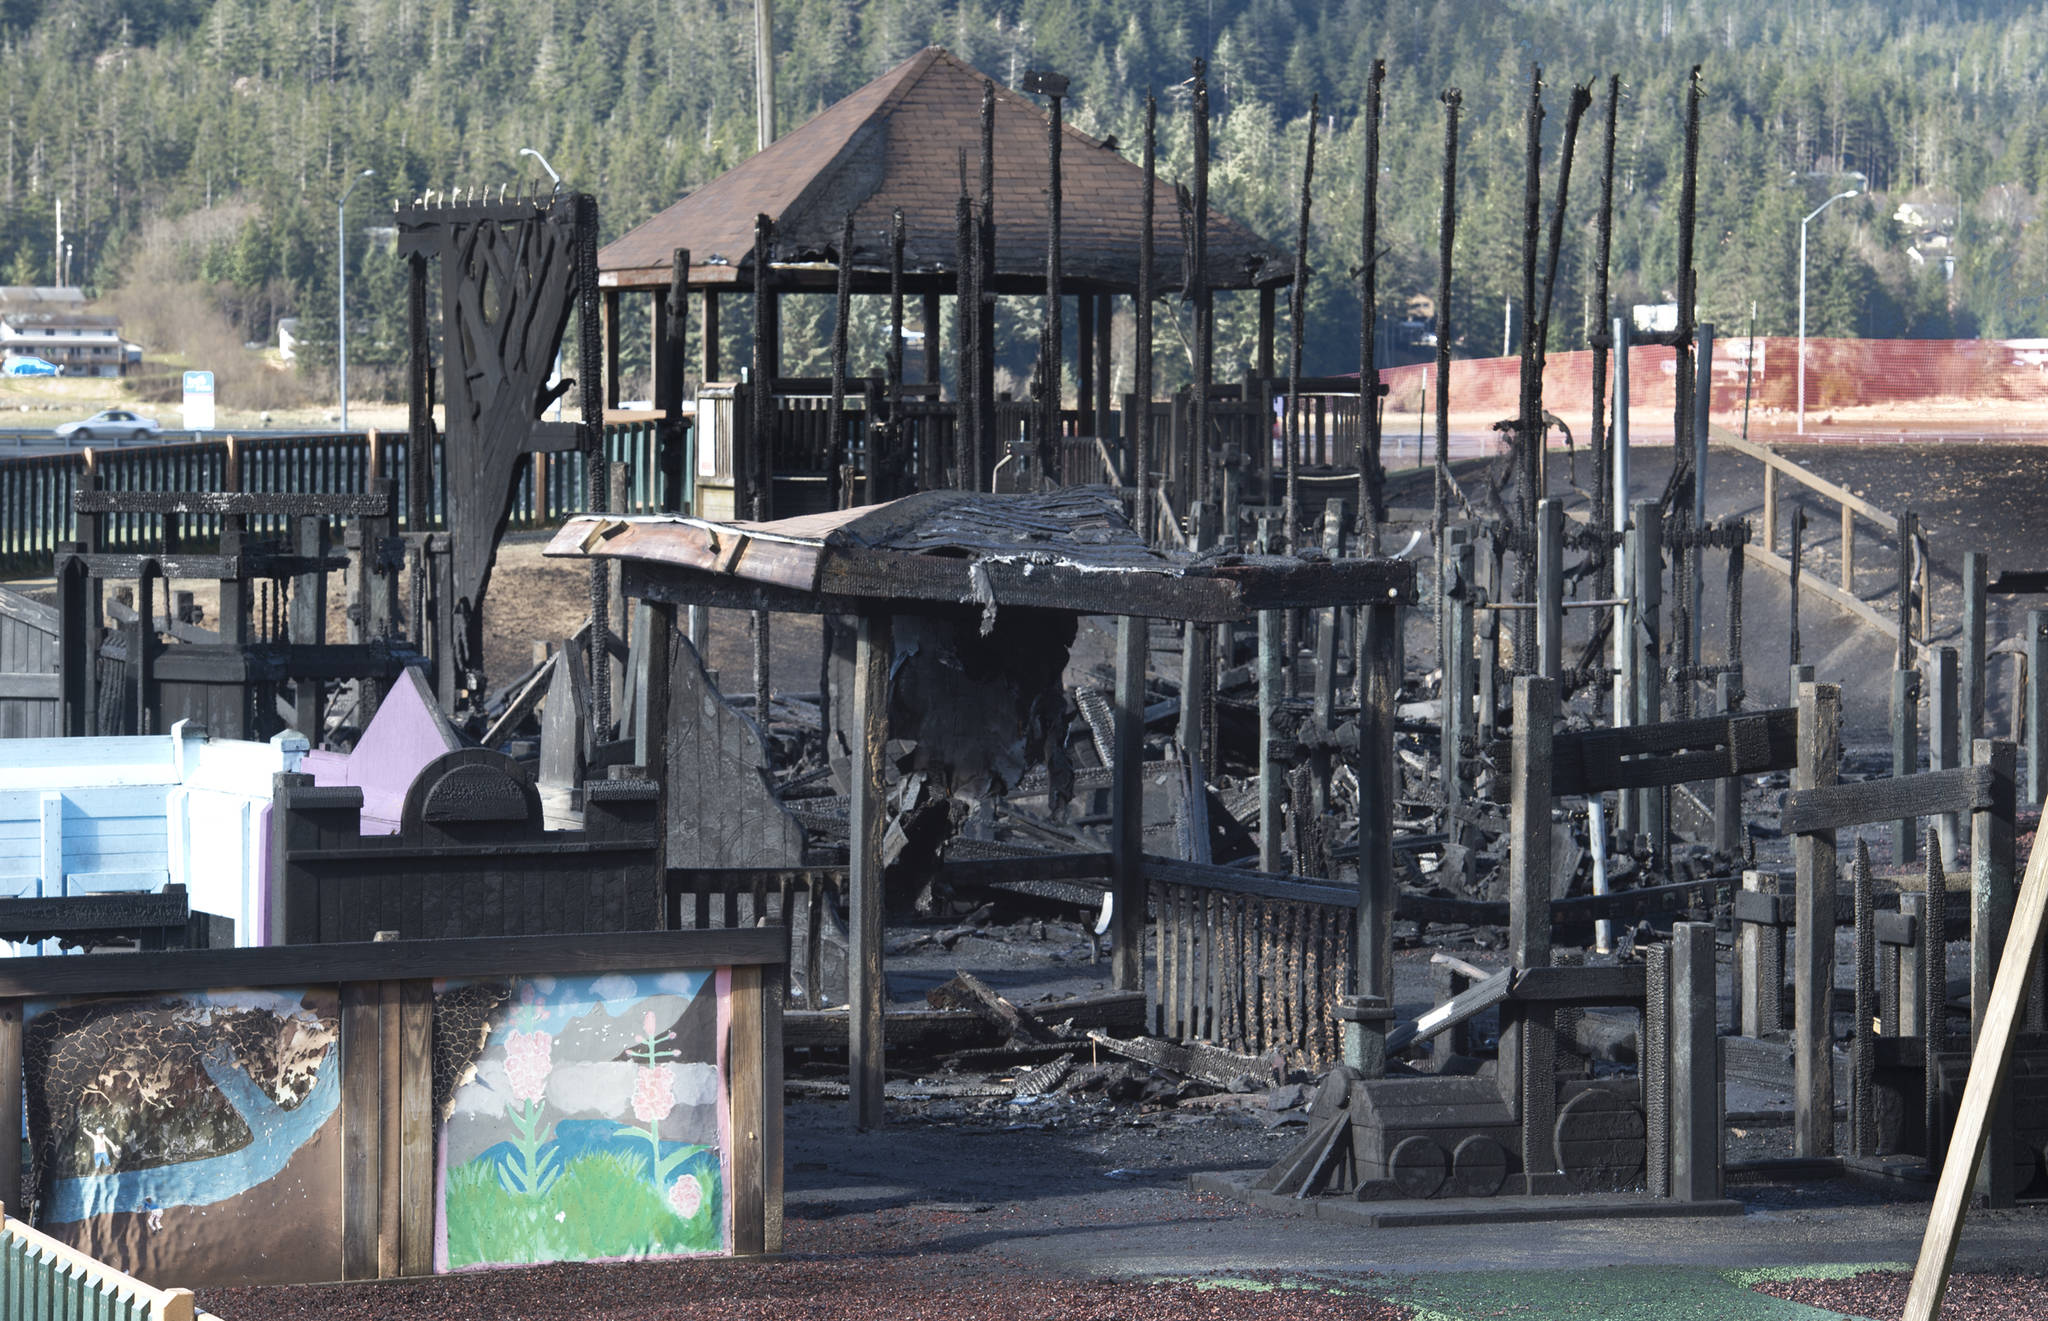 The cleanup process for the Twin Lakes Playground is set to begin this month. The playground was burned down in April, and the community has raised around $150,000 for the rebuild effort. (Michael Penn | Juneau Empire file)